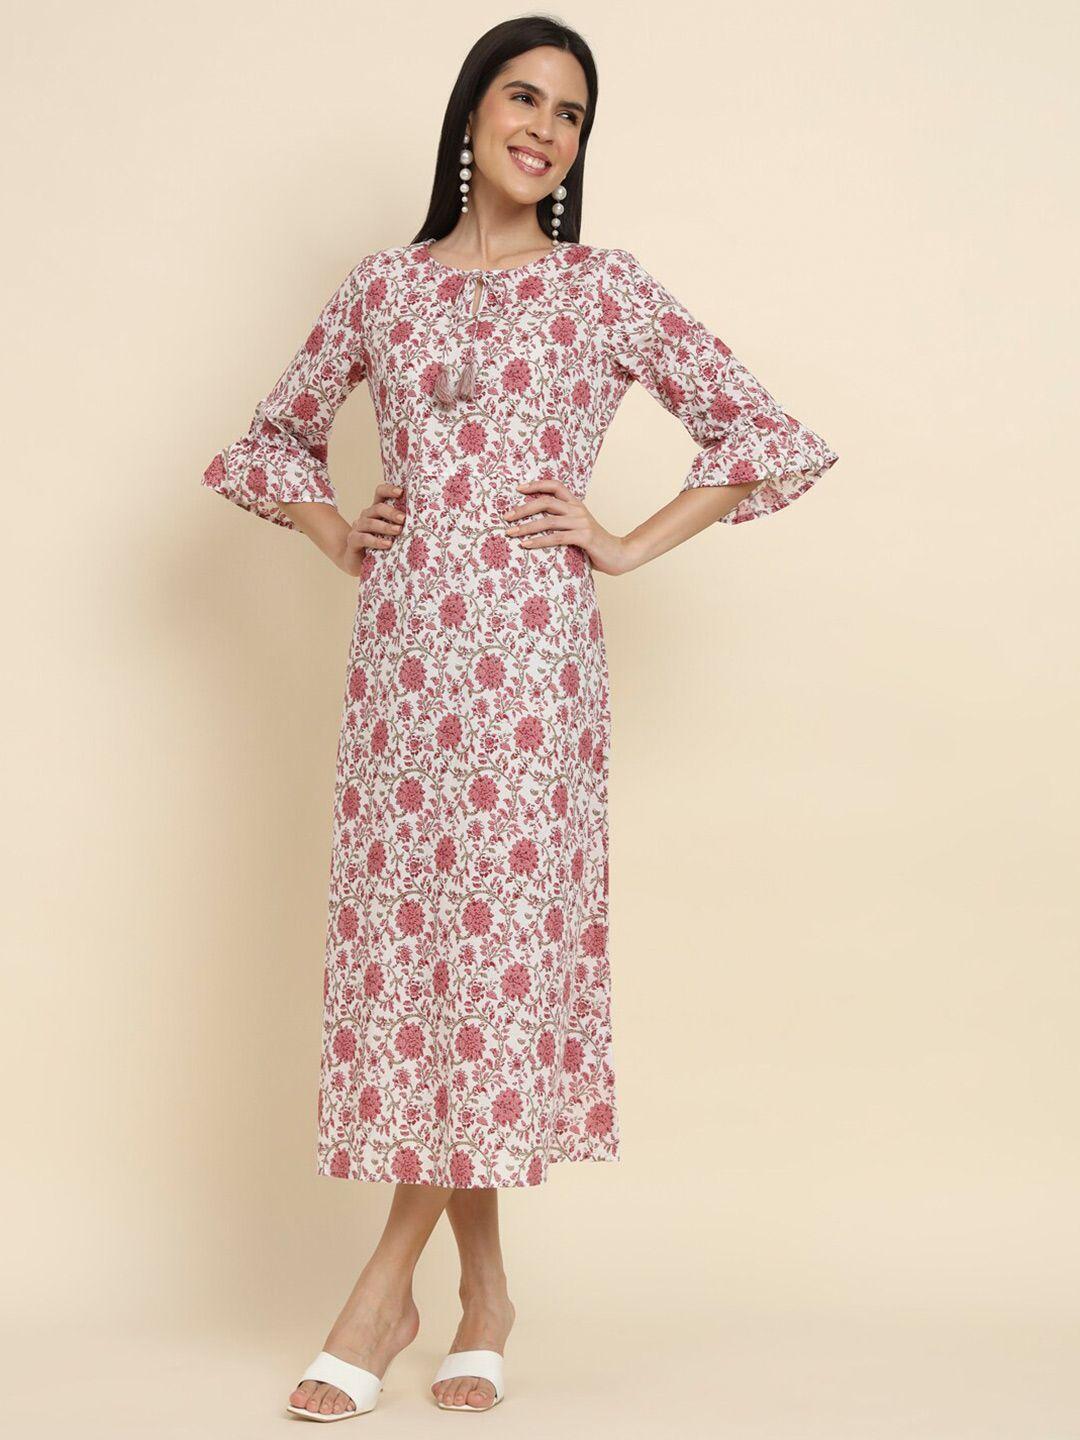 here&now-white-&-pink-floral-printed-bell-sleeves-a-line-midi-cotton-dress